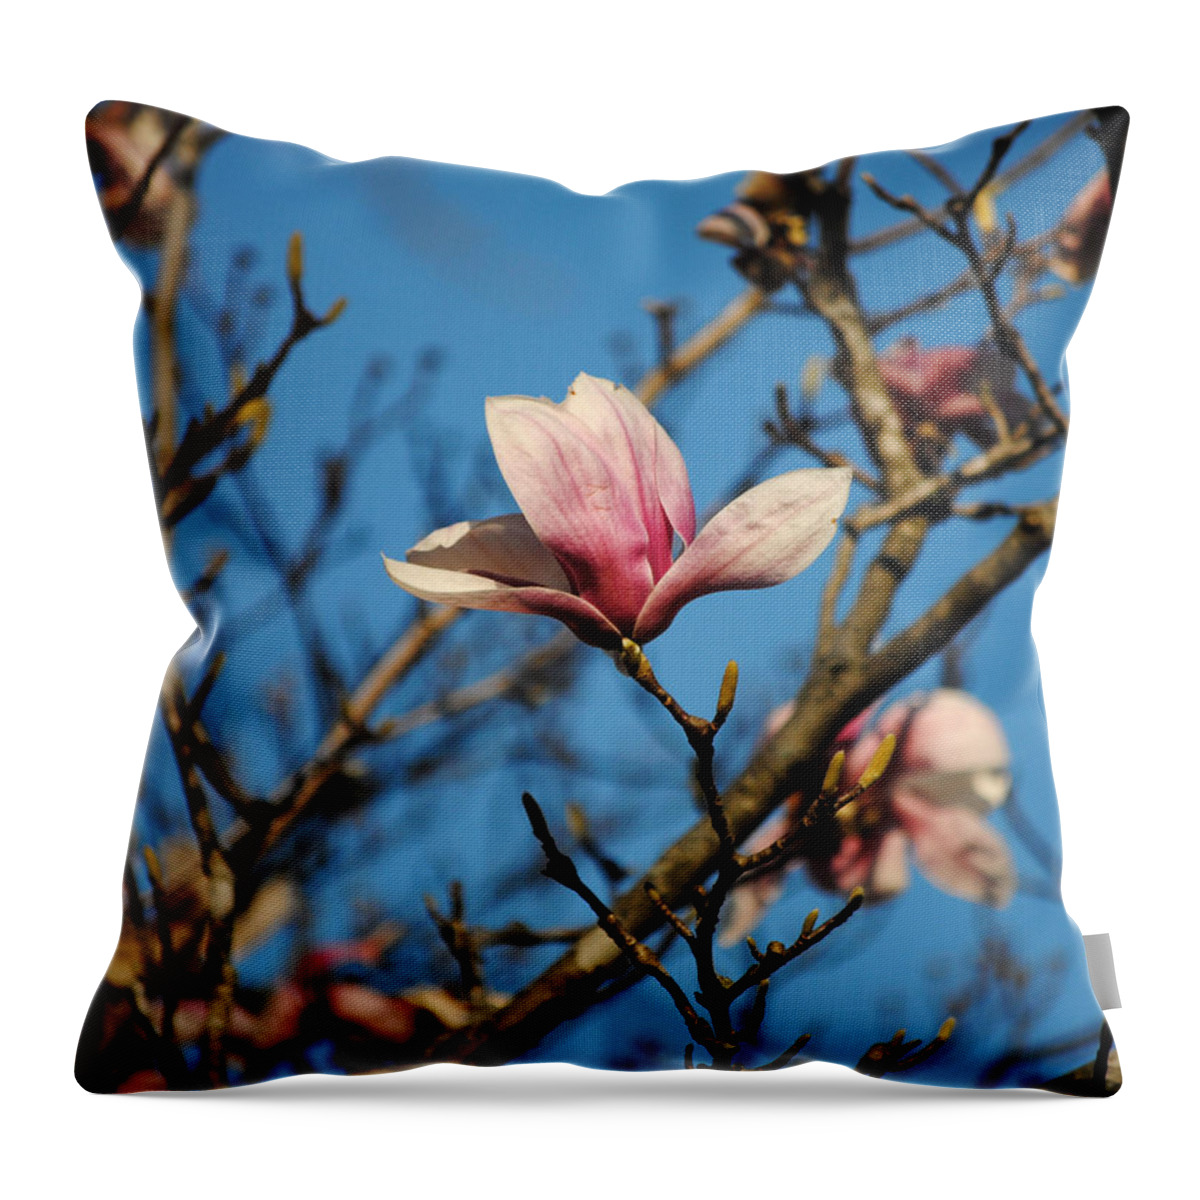 Flower Throw Pillow featuring the photograph Pink Magnolia Flower by Jai Johnson